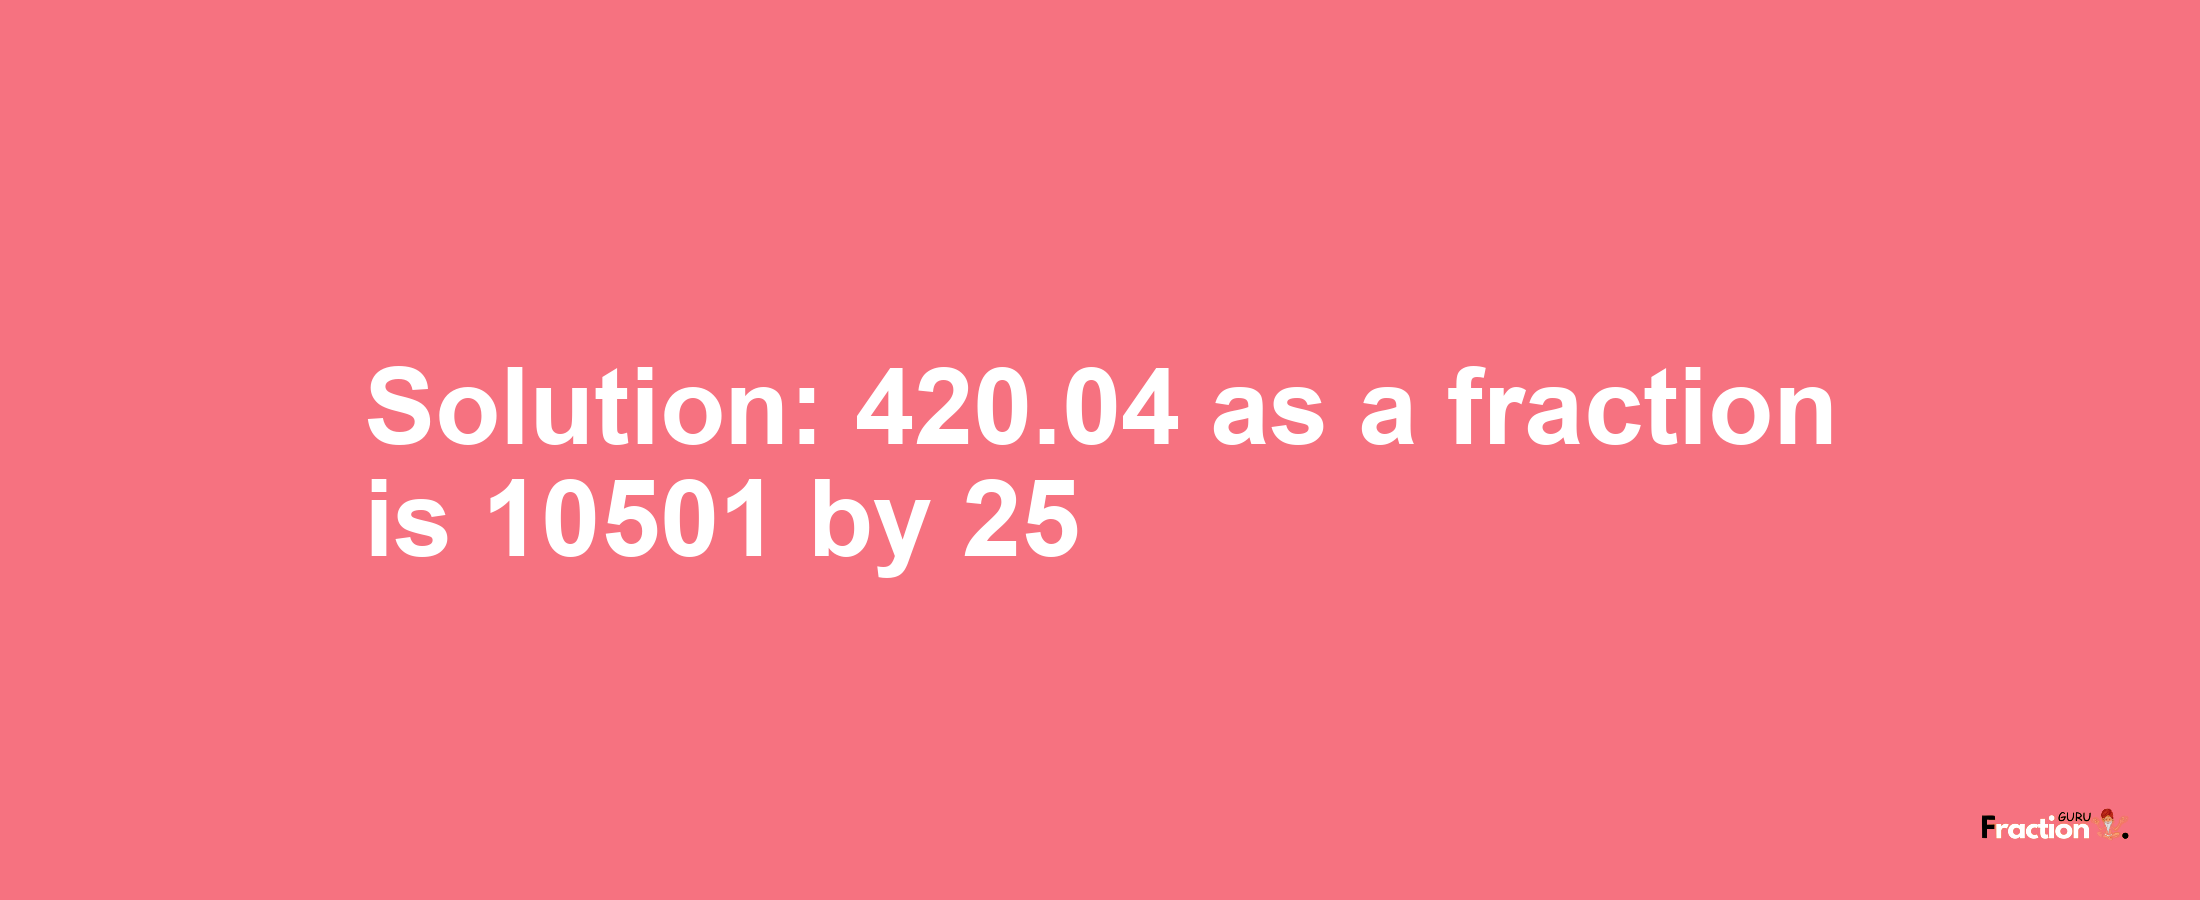 Solution:420.04 as a fraction is 10501/25